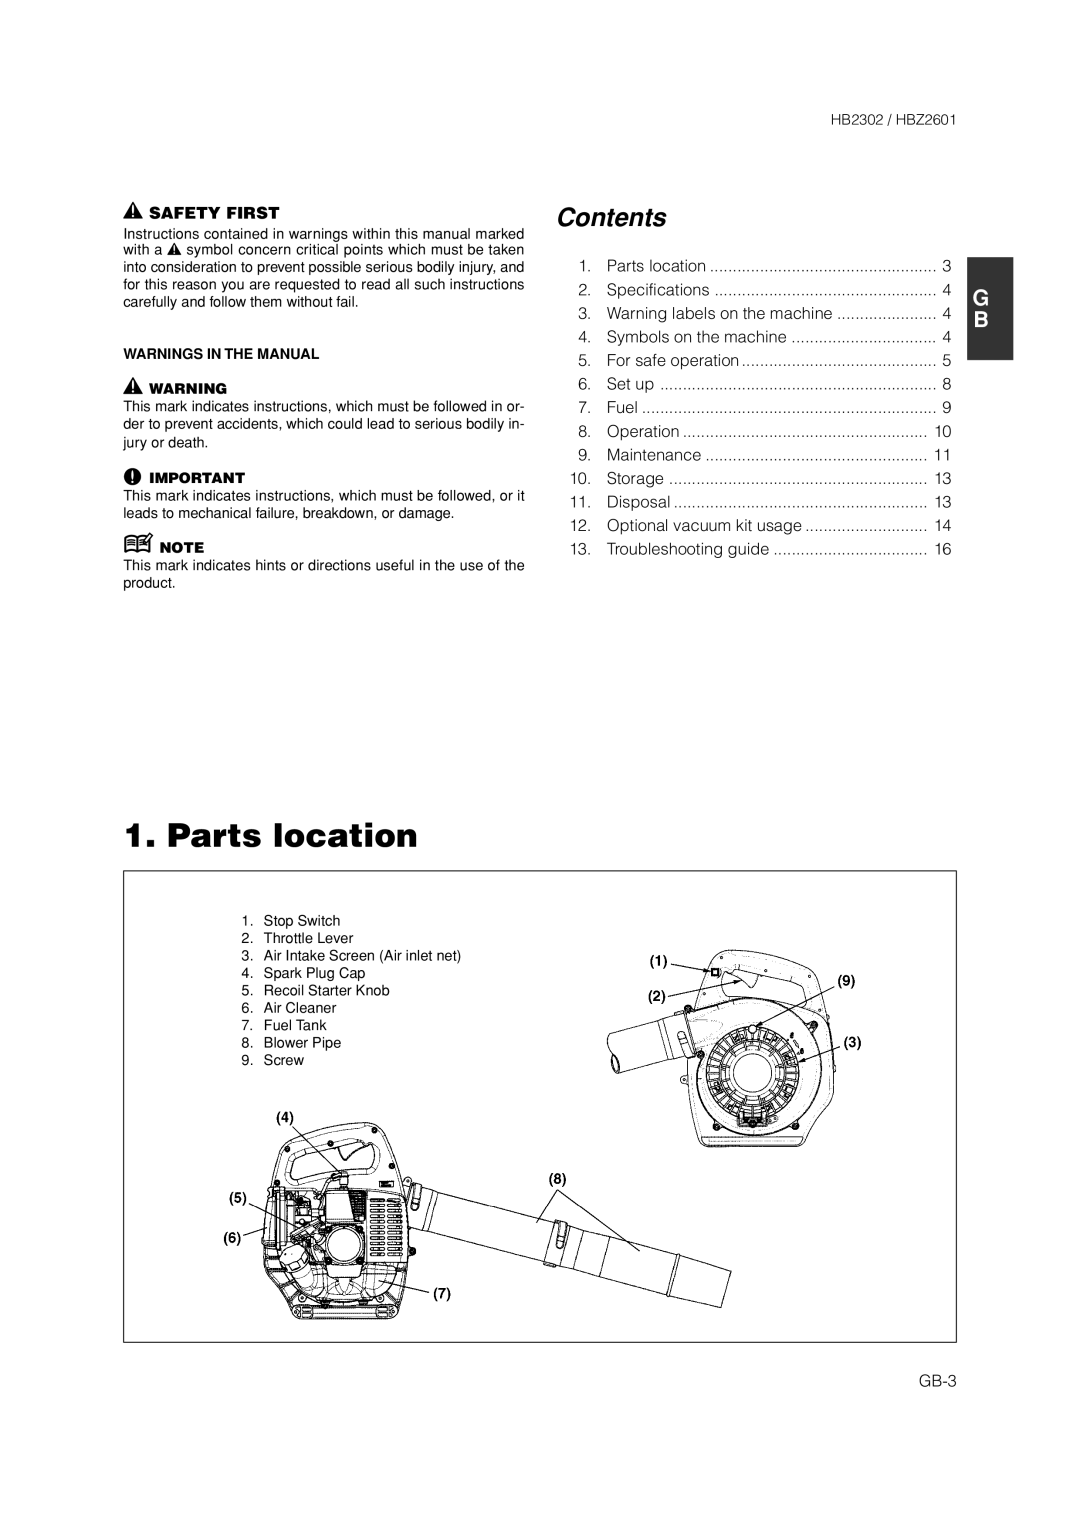 Zenoah HBZ2601 owner manual Parts location, Safety First, Contents 